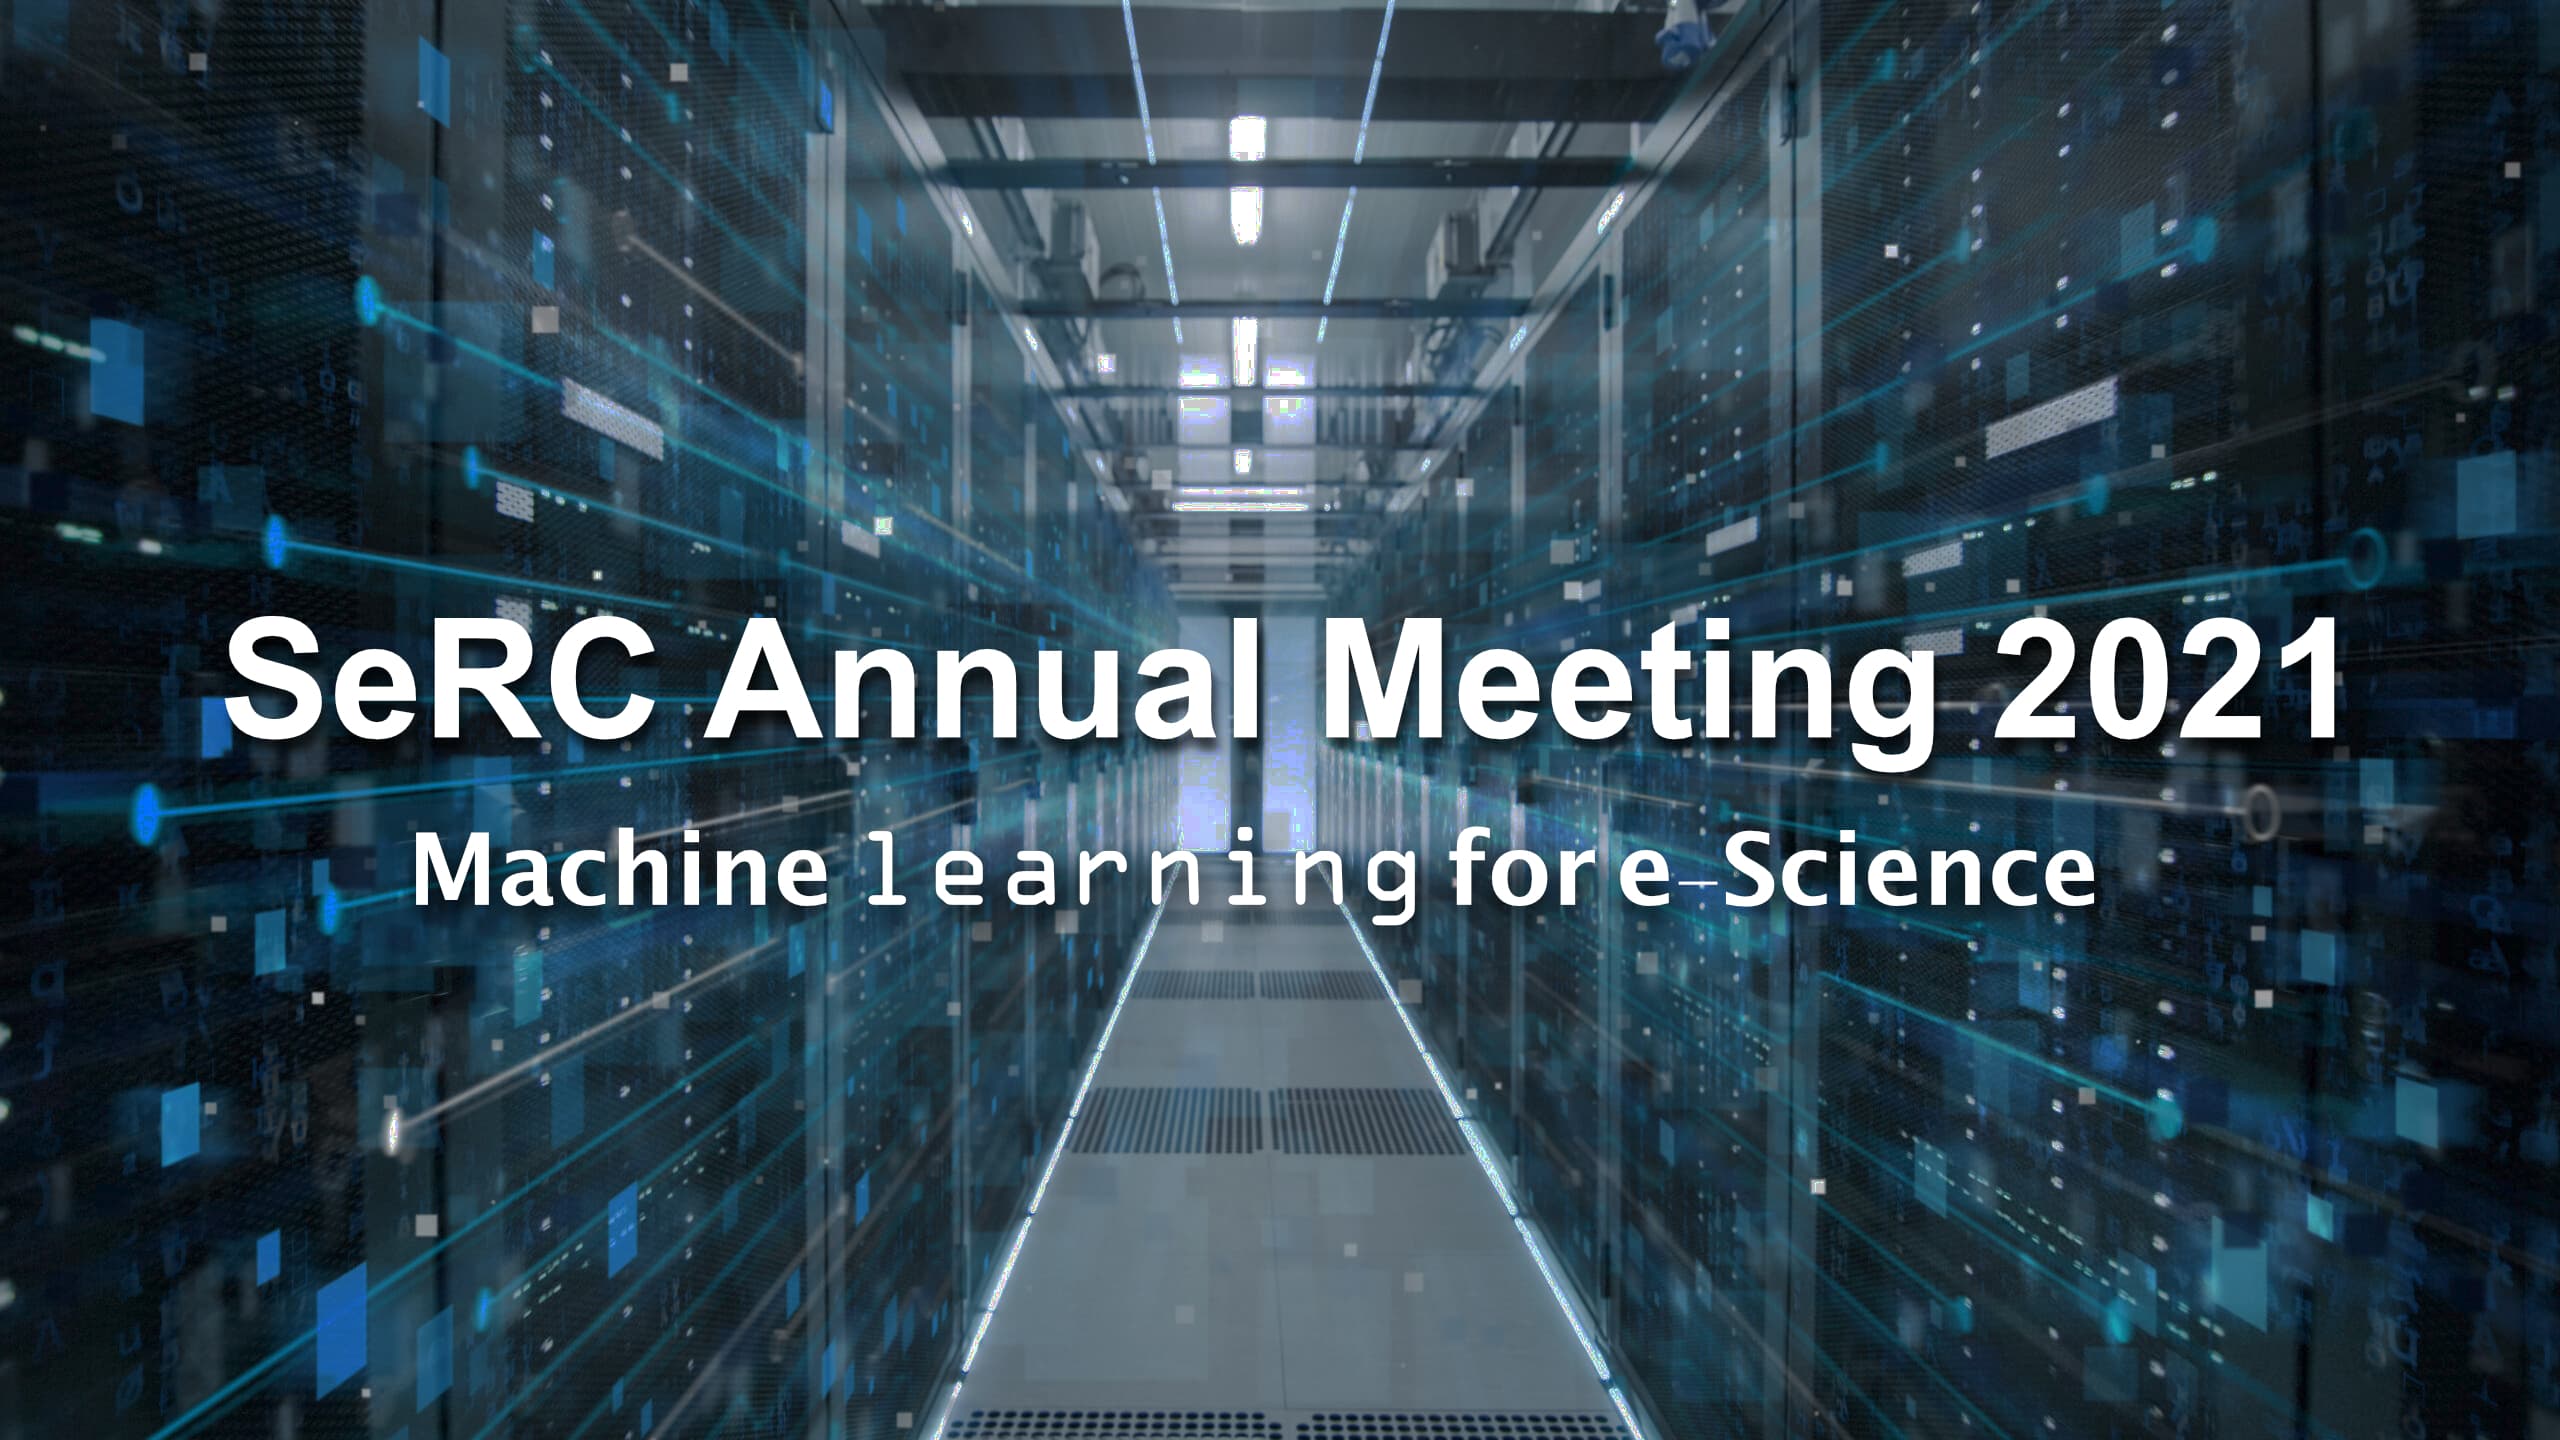 SeRC Annual Meeting 2021 – Machine learning for e-Science